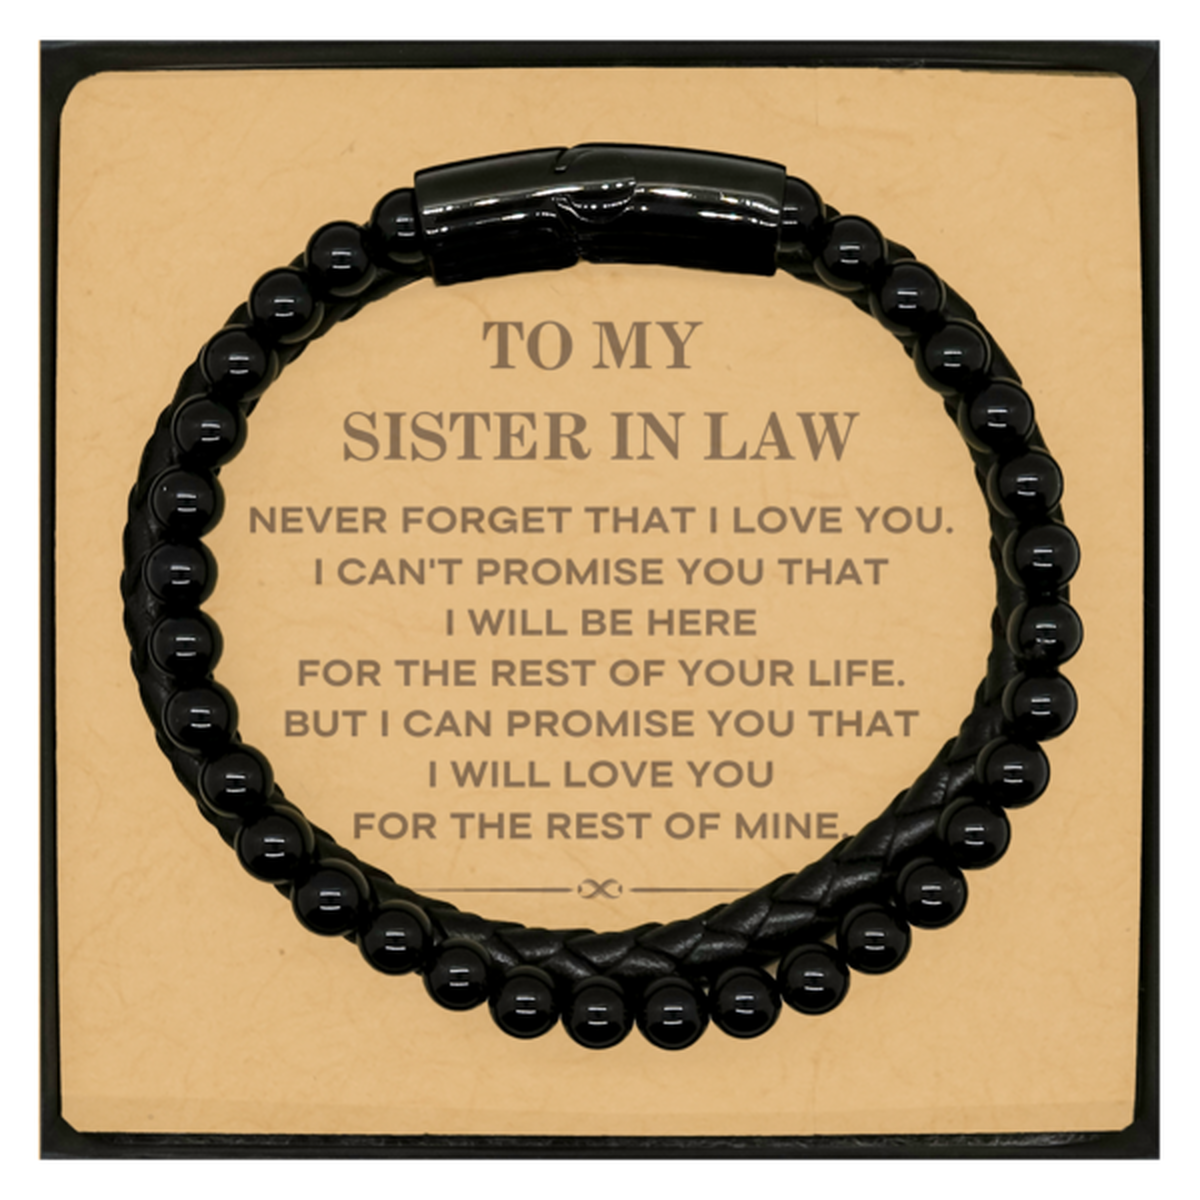 To My Sister In Law Gifts, I will love you for the rest of mine, Love Sister In Law Bracelet, Birthday Christmas Unique Stone Leather Bracelets For Sister In Law